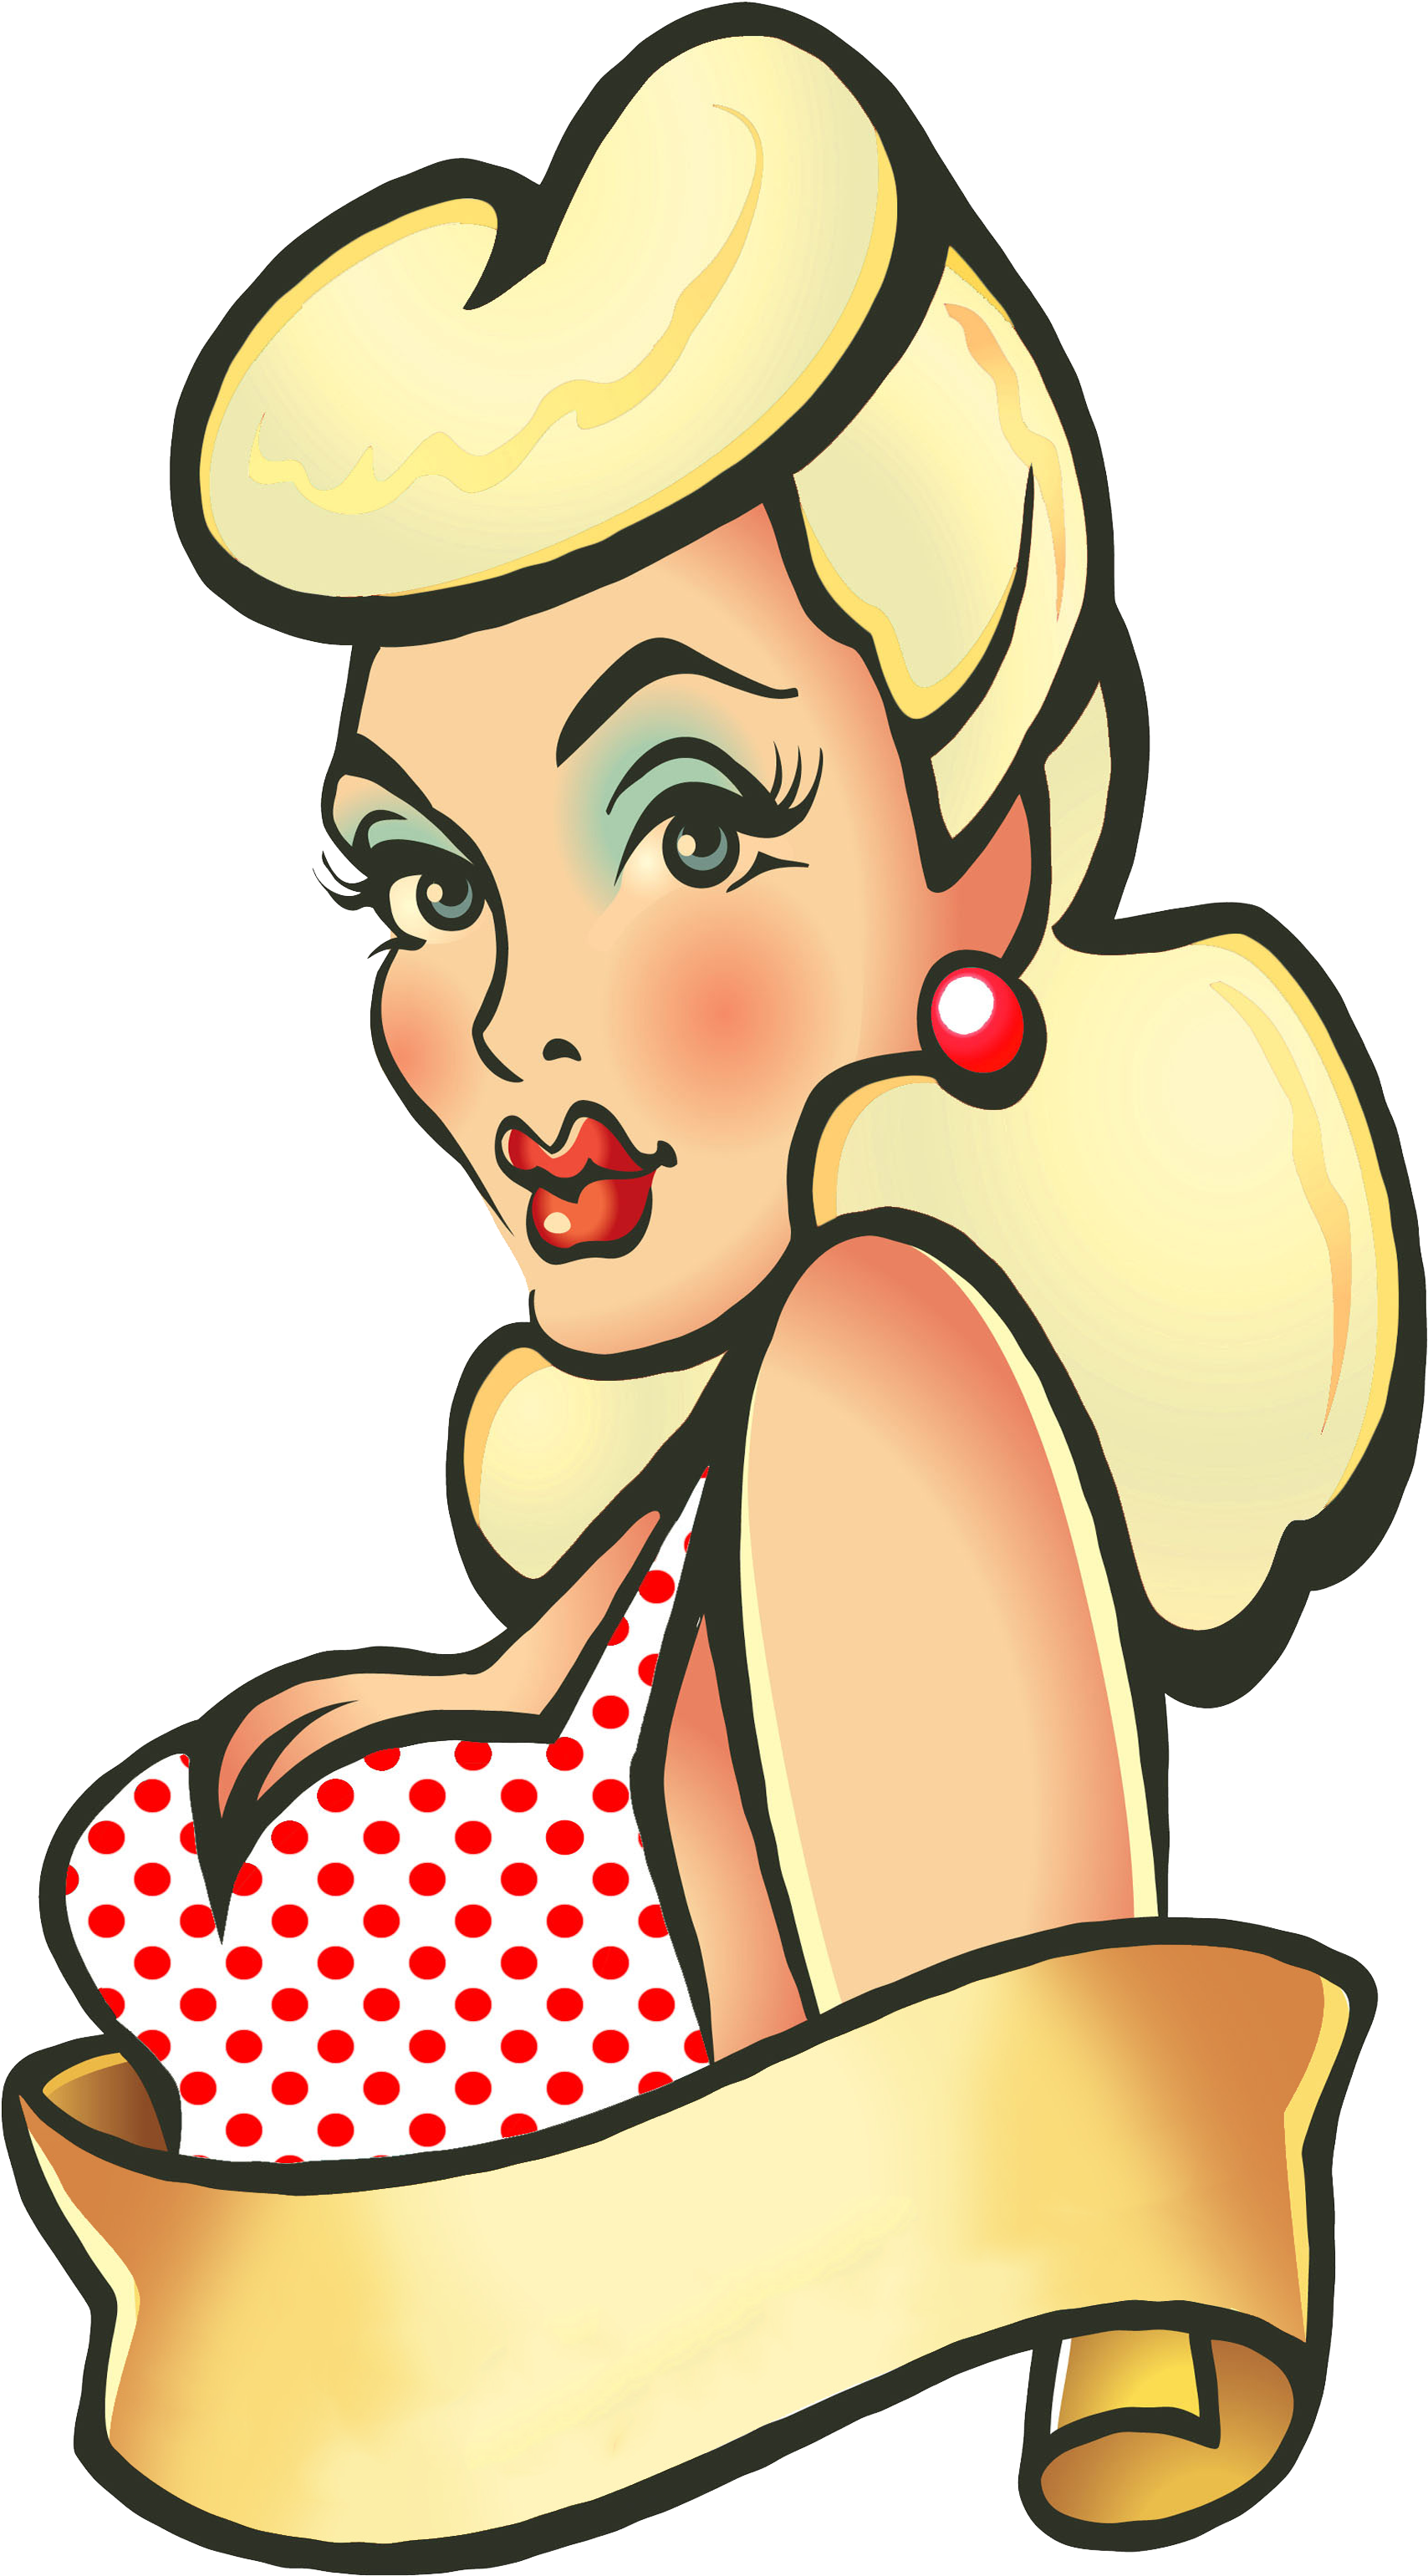 Black Hair Bettie Bang Paige Style Rockabilly Greaser - Rockabilly Pin Up Tattoo (2550x3300)